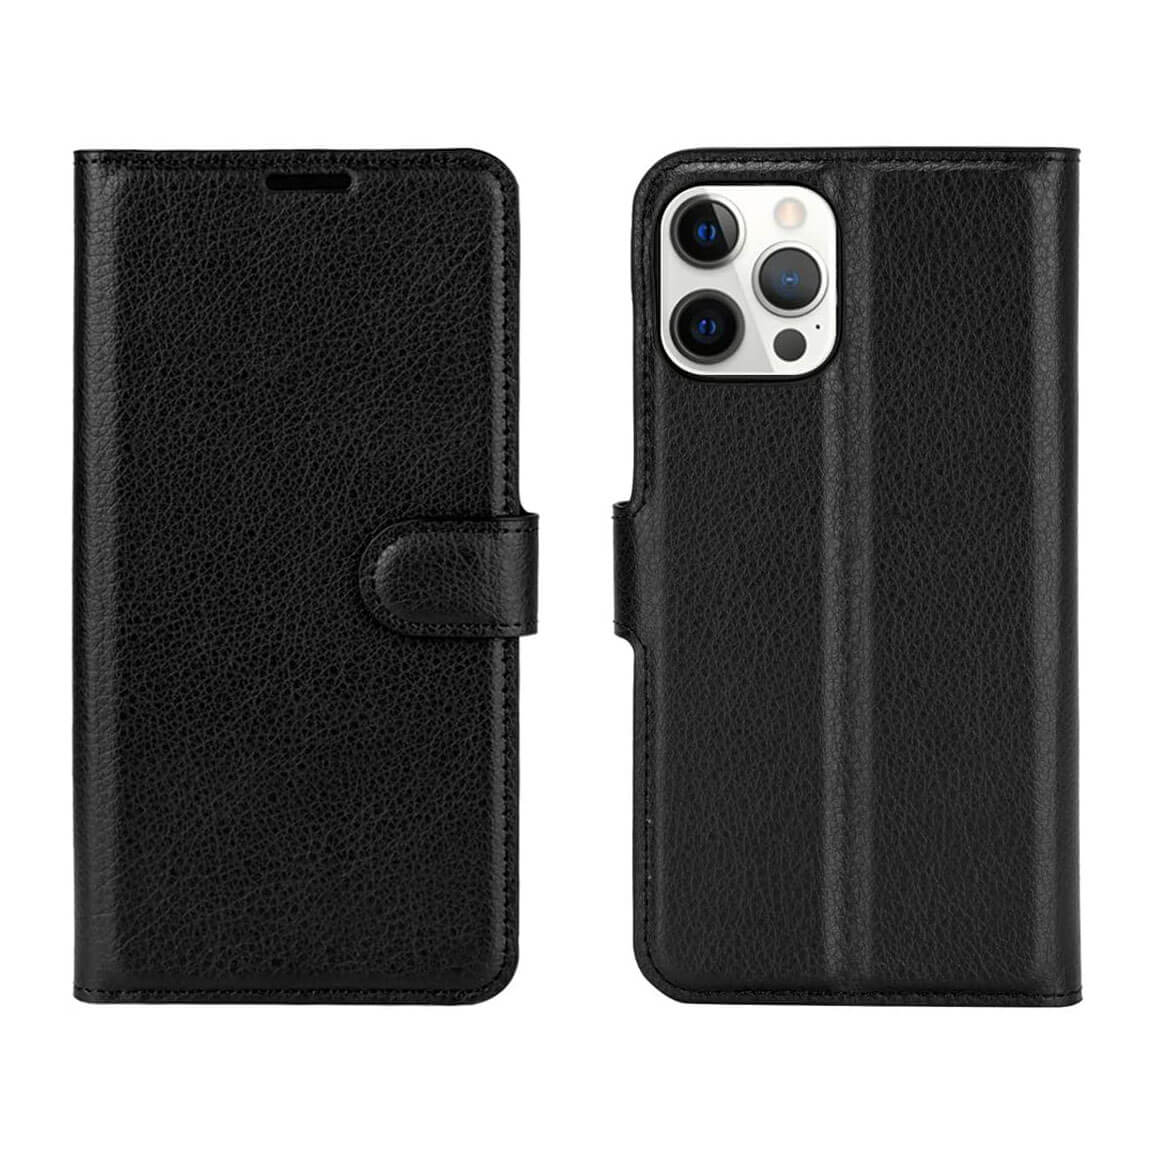 PU Leather Wallet Cover For Apple iPhone 12 Pro Max Case Holder Card Slots Black